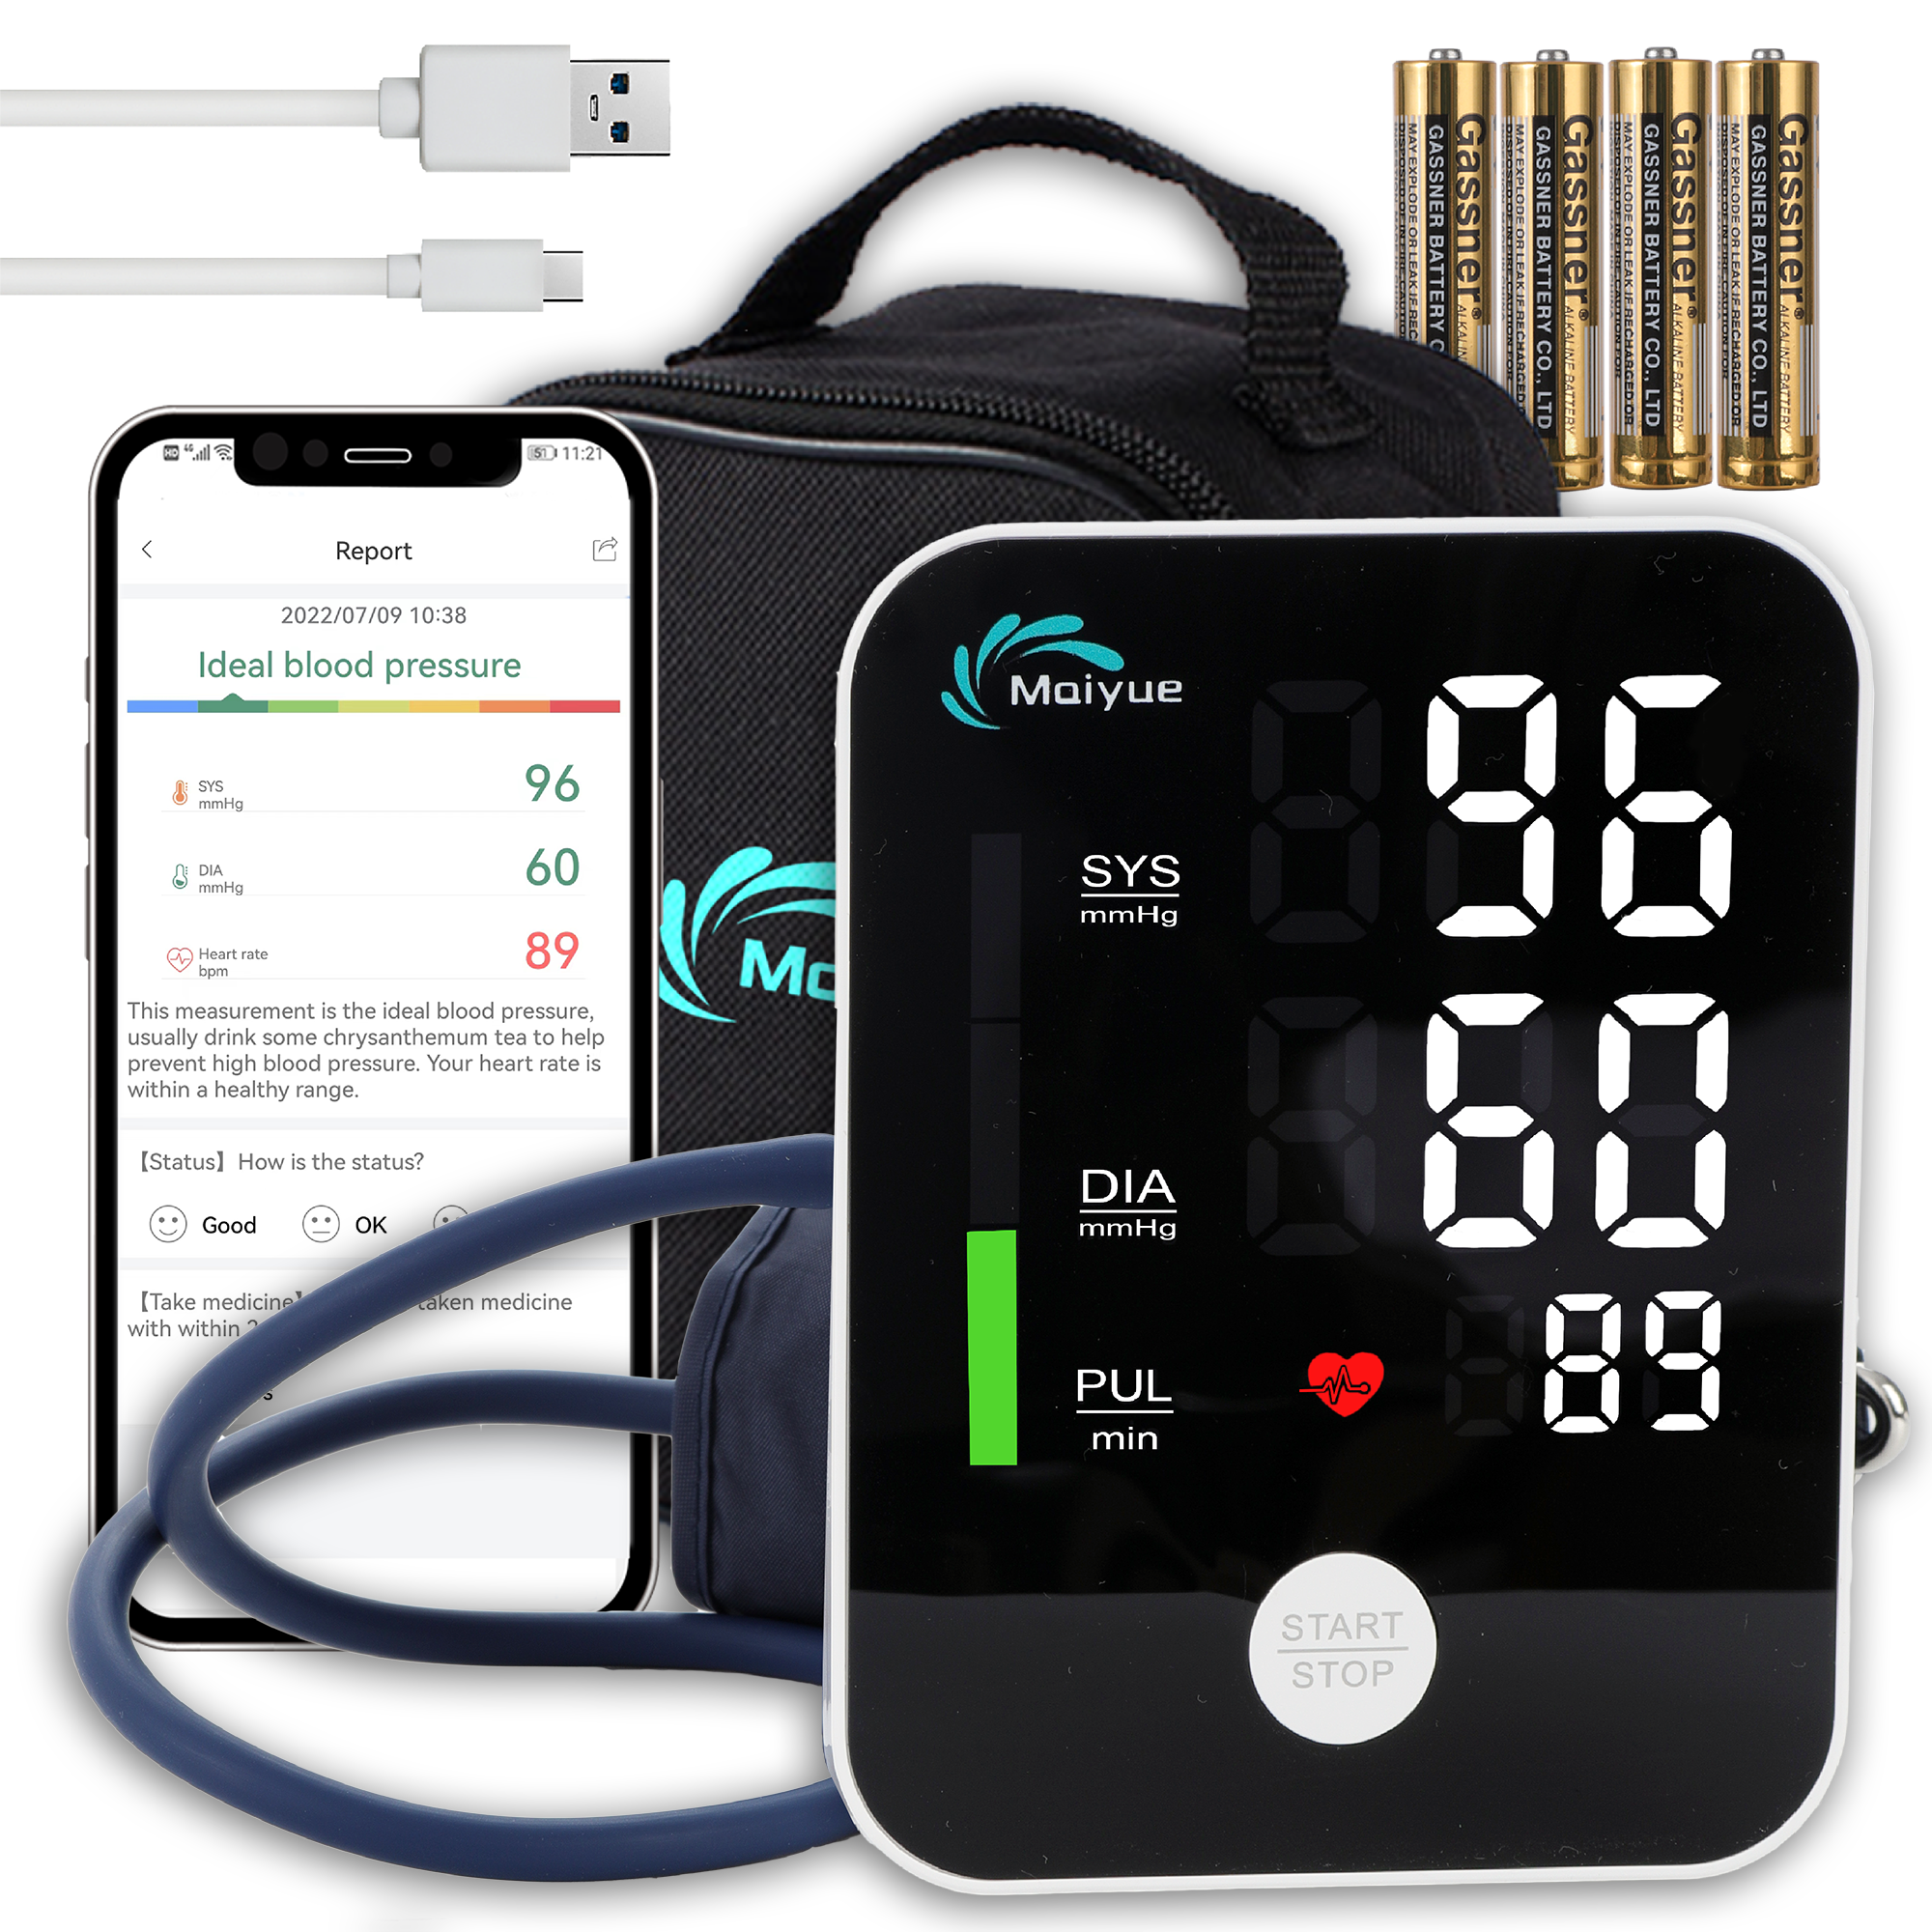  Checkme Blood Pressure Monitor for Home Use - Upper Arm Cuff,  Bluetooth BP Machine, Accurate Readings in 30 sec, App Enabled for iOS &  Android, Stores 50 BP Readings, FSA/HSA Eligible